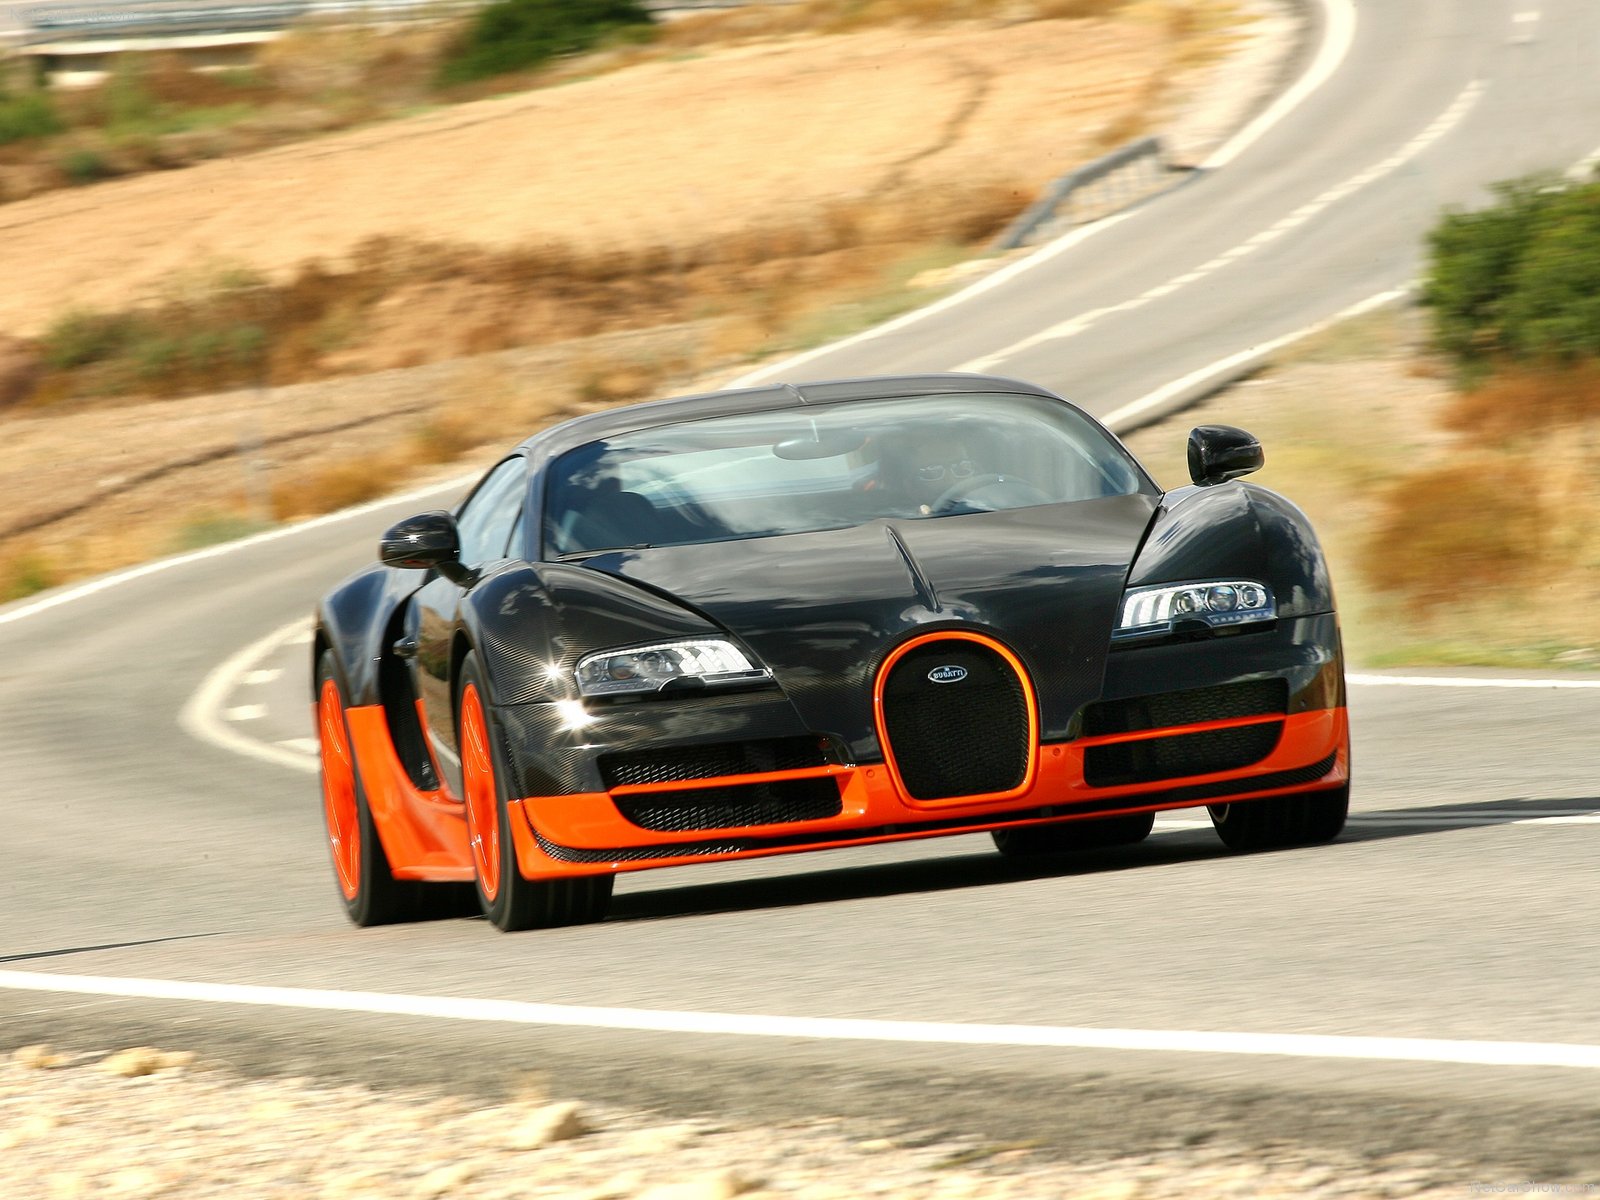 The climax of the Veyron series: the Bugatti Veyron Super Sport